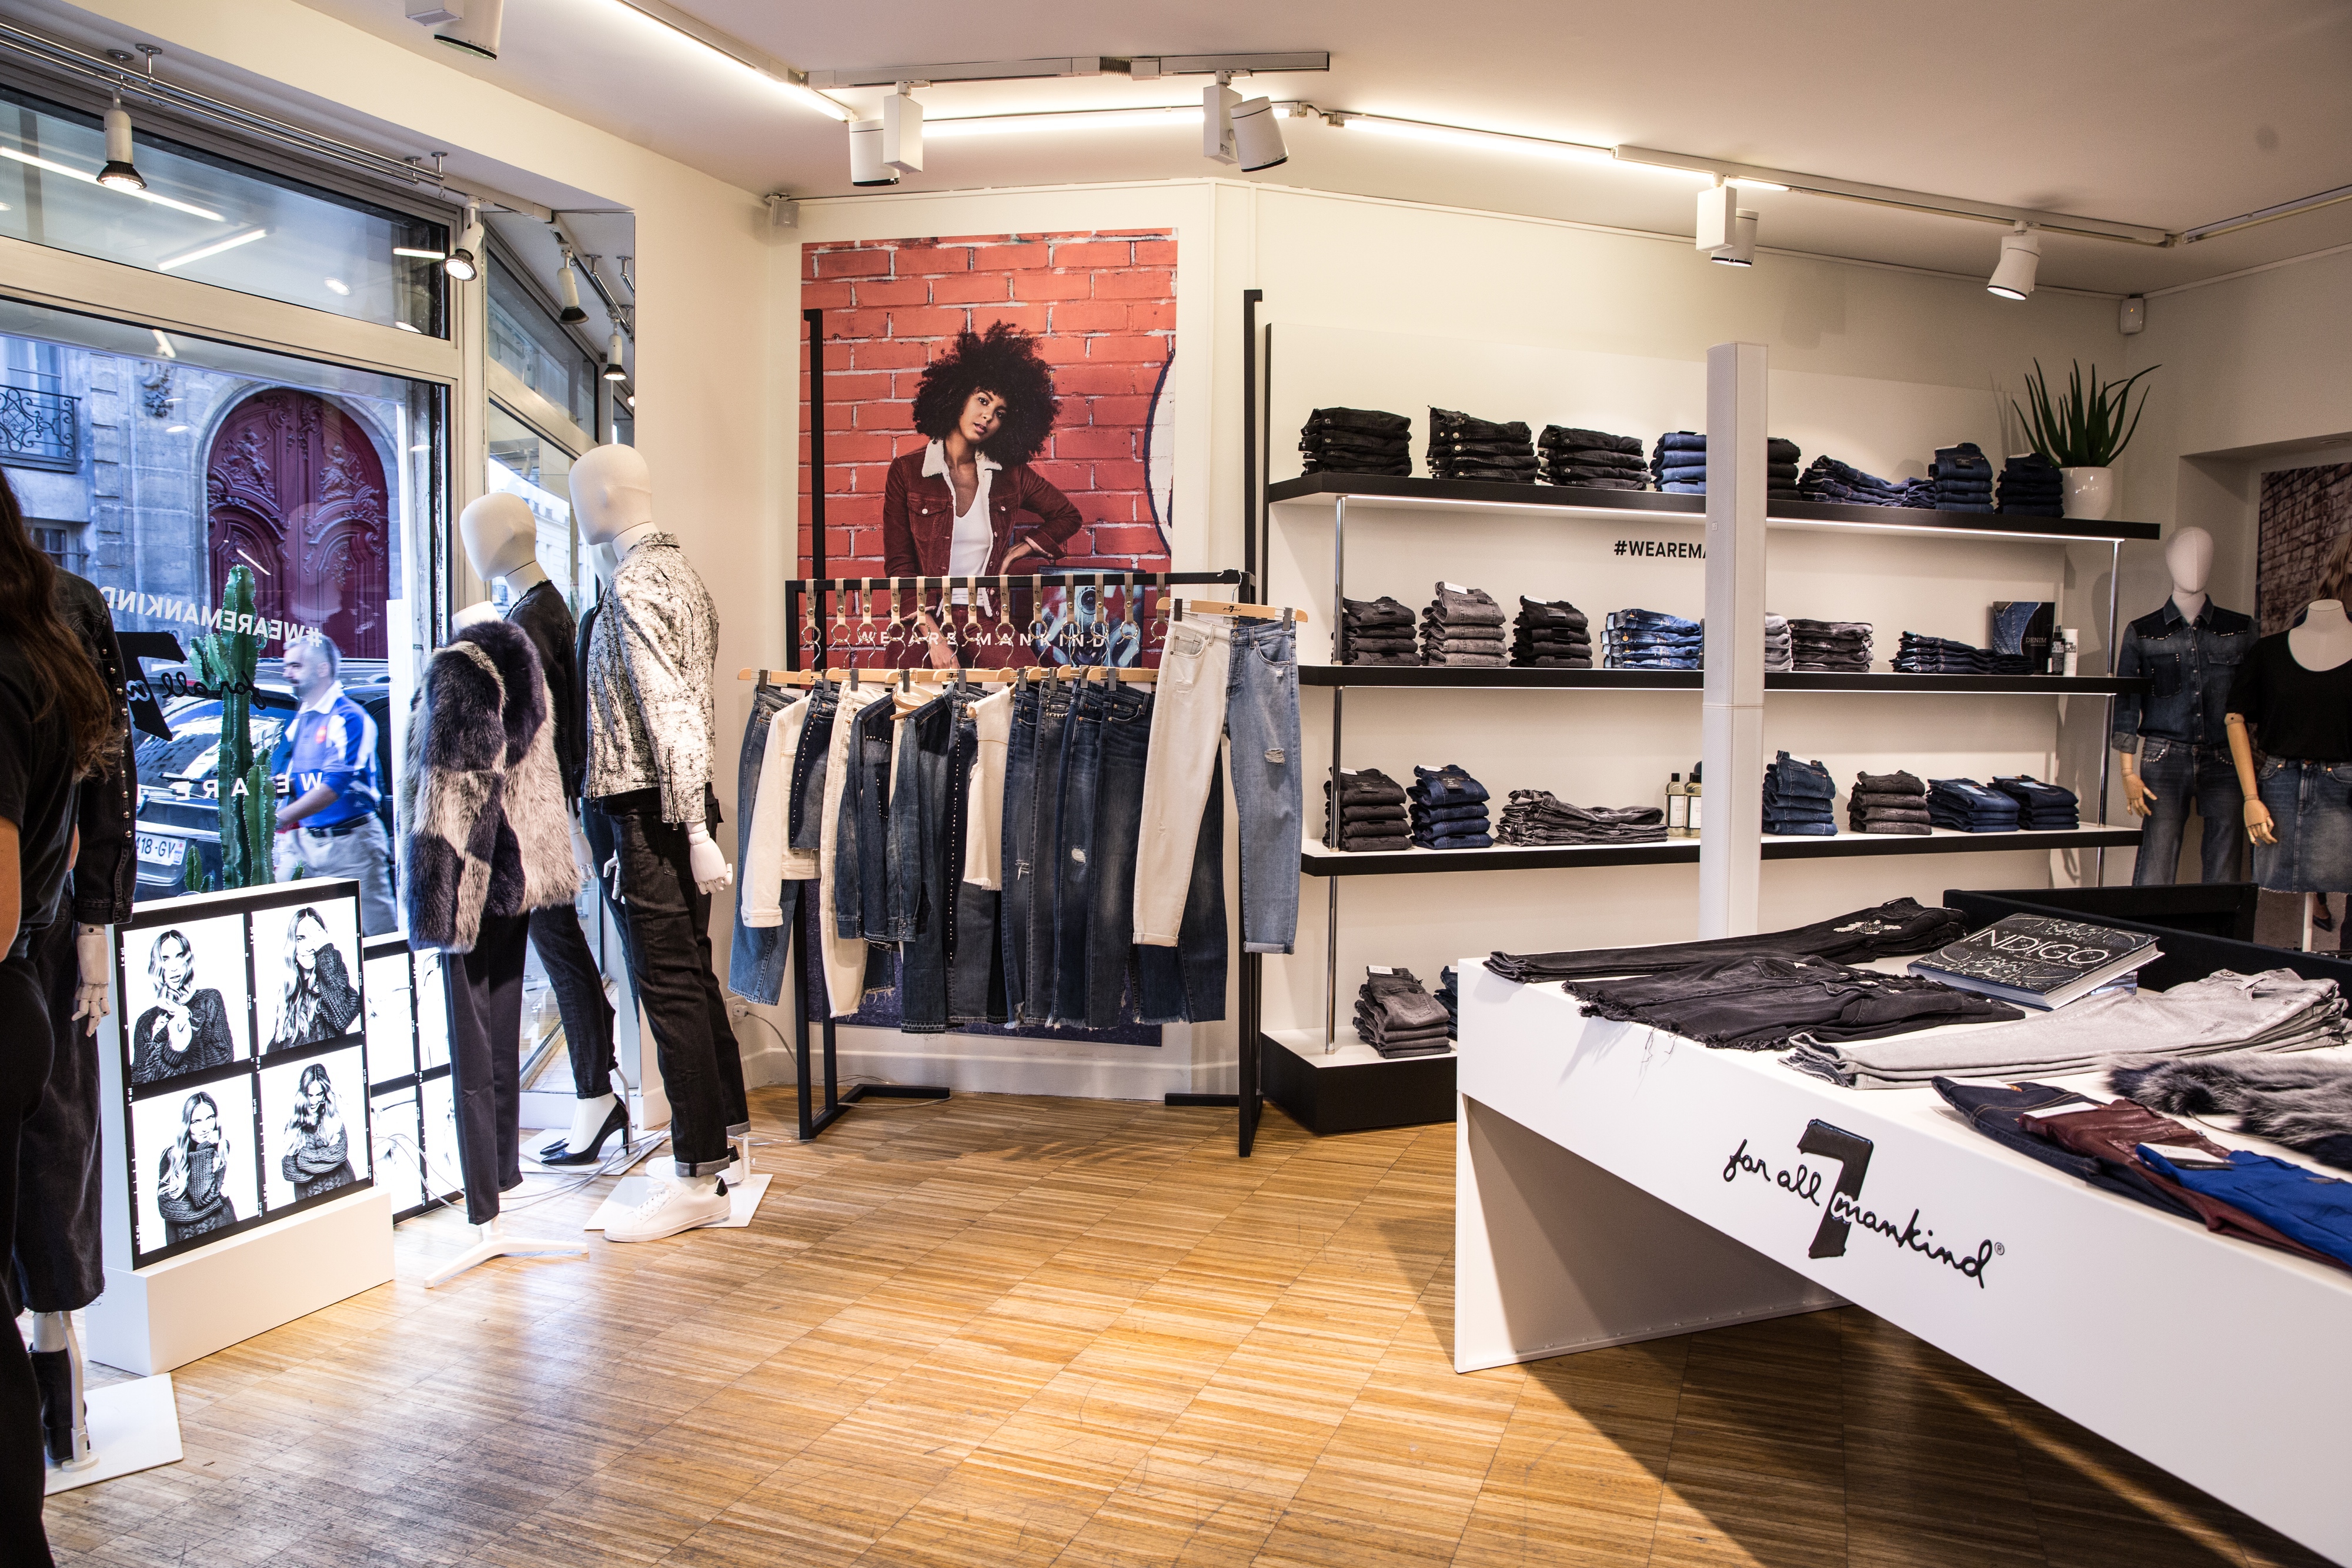 7 For All Mankind Builds Buzz With Its Pop Up Store In Le Marais